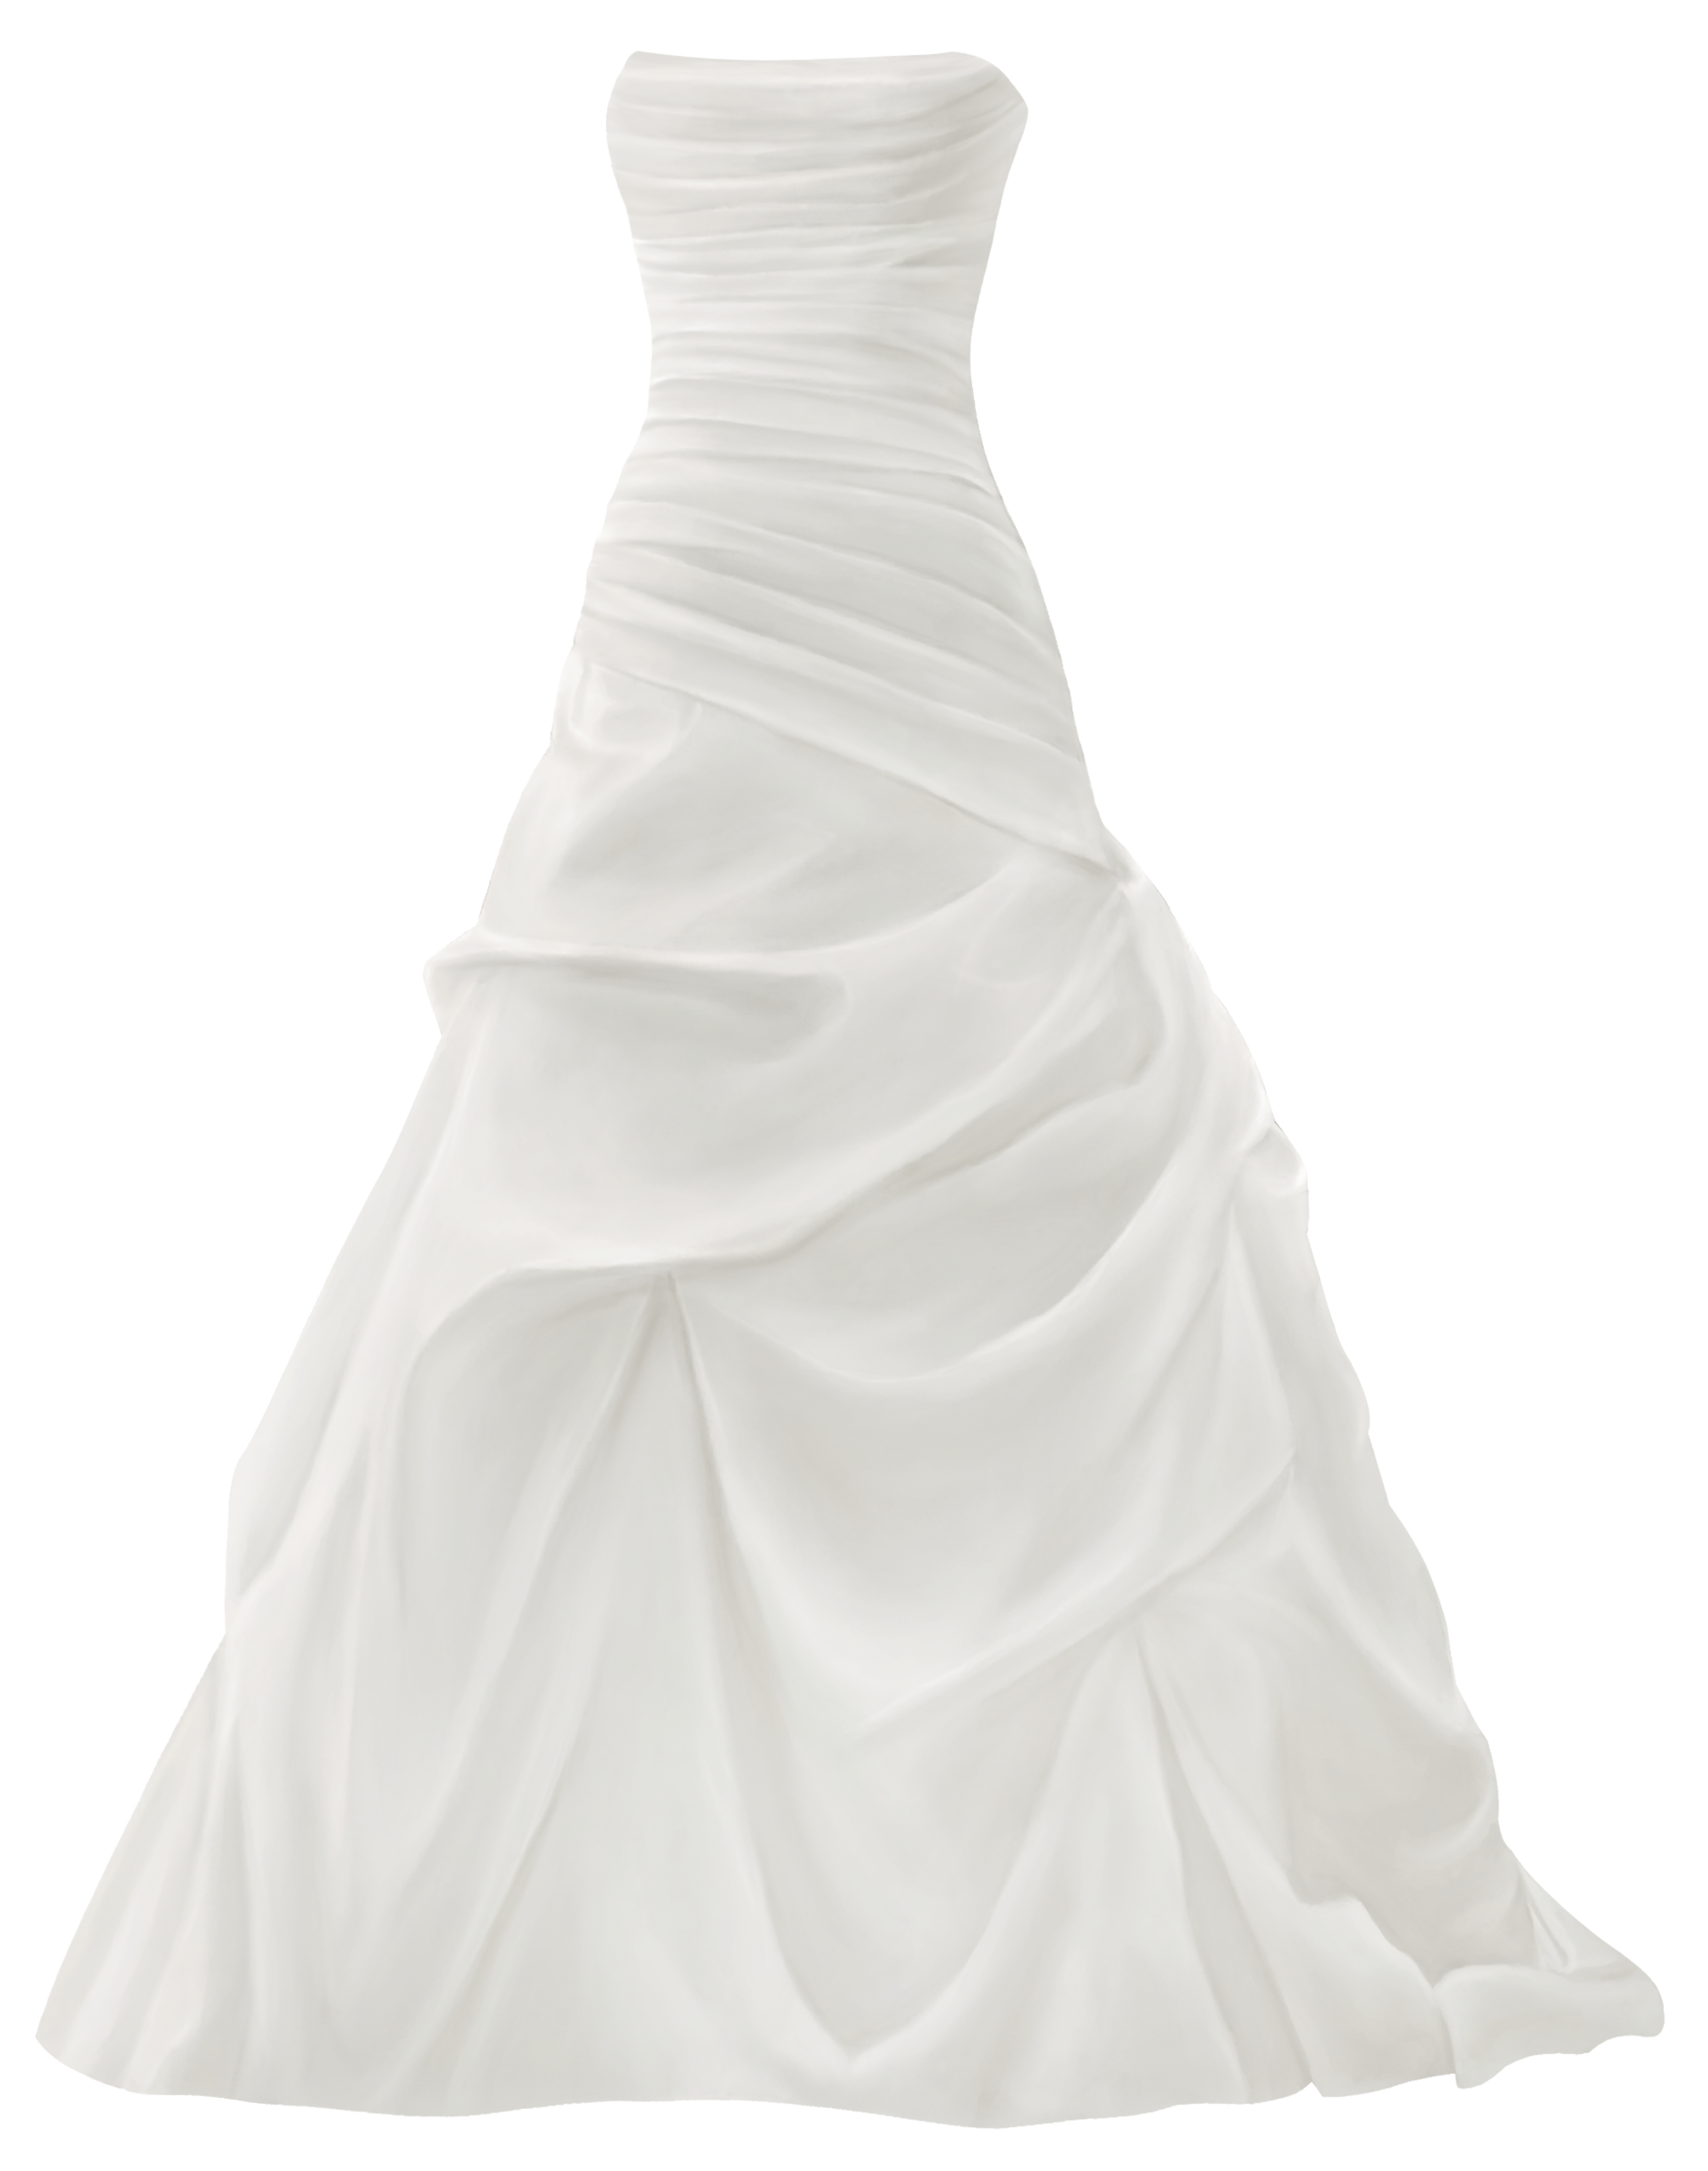 Bridal Gown Clipart PNG Images Purple Wedding Dress Bridal Gown  Ilustration Clipart Wedding Dress Clipart Wedding Clipart Purple Dress  PNG Image For Free Do  Purple wedding dress Dress clipart Purple wedding